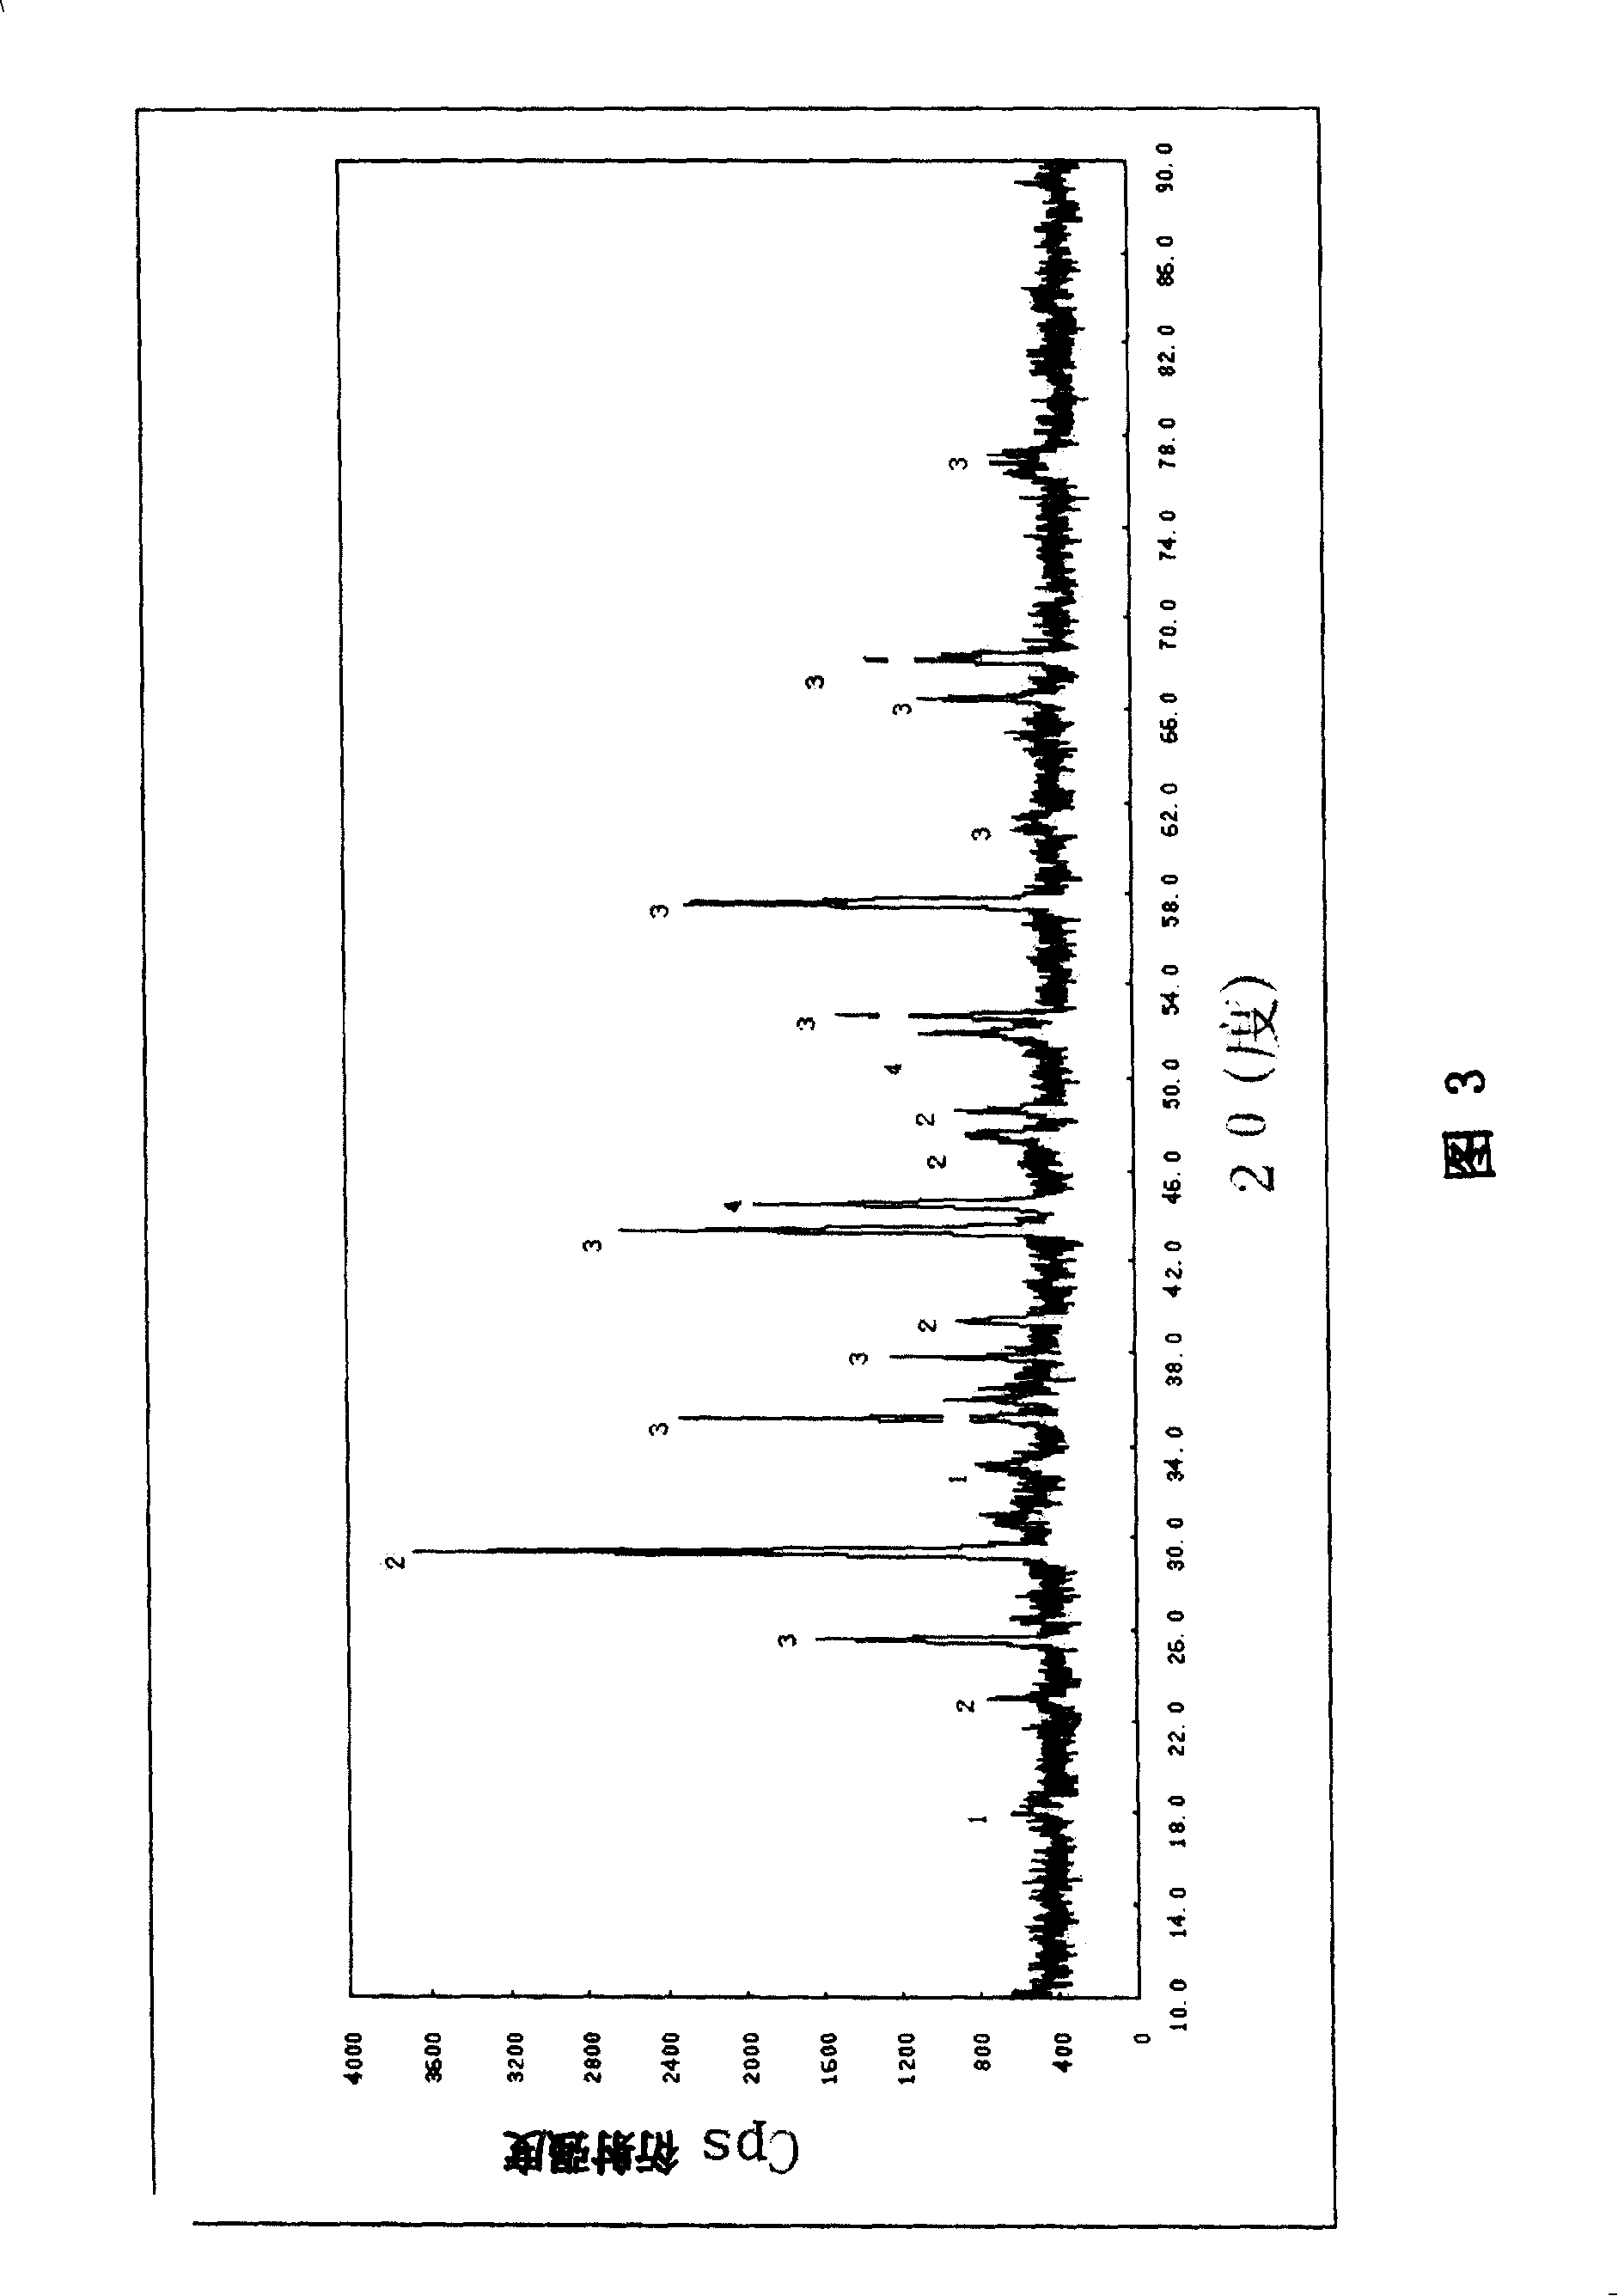 Composite catalyst used for reforming hydrogen prodn. using methane and water vapor as raw material, preparing process and use thereof